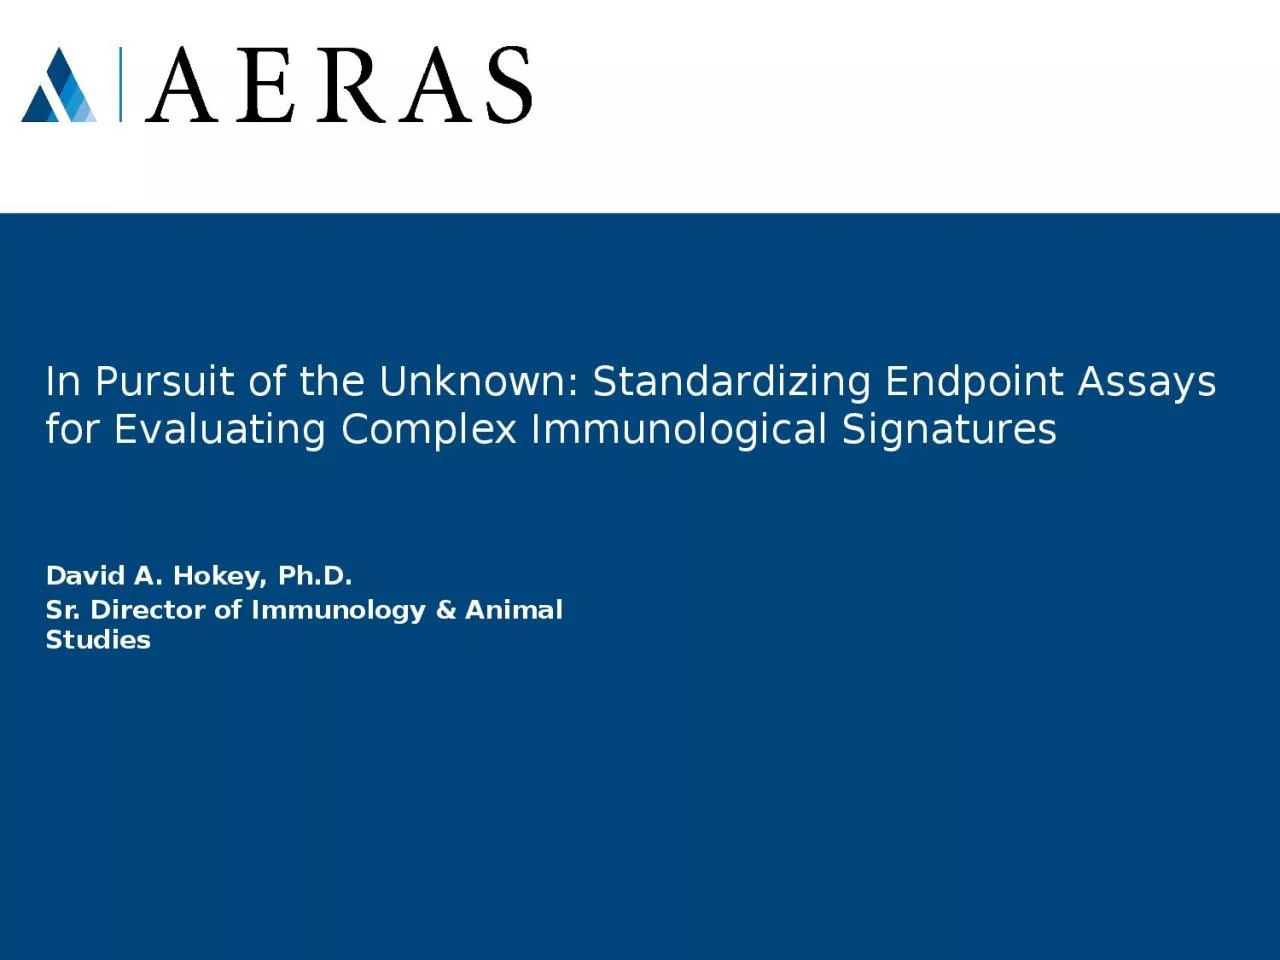 In Pursuit of the Unknown: Standardizing Endpoint Assays for Evaluating Complex Immunological